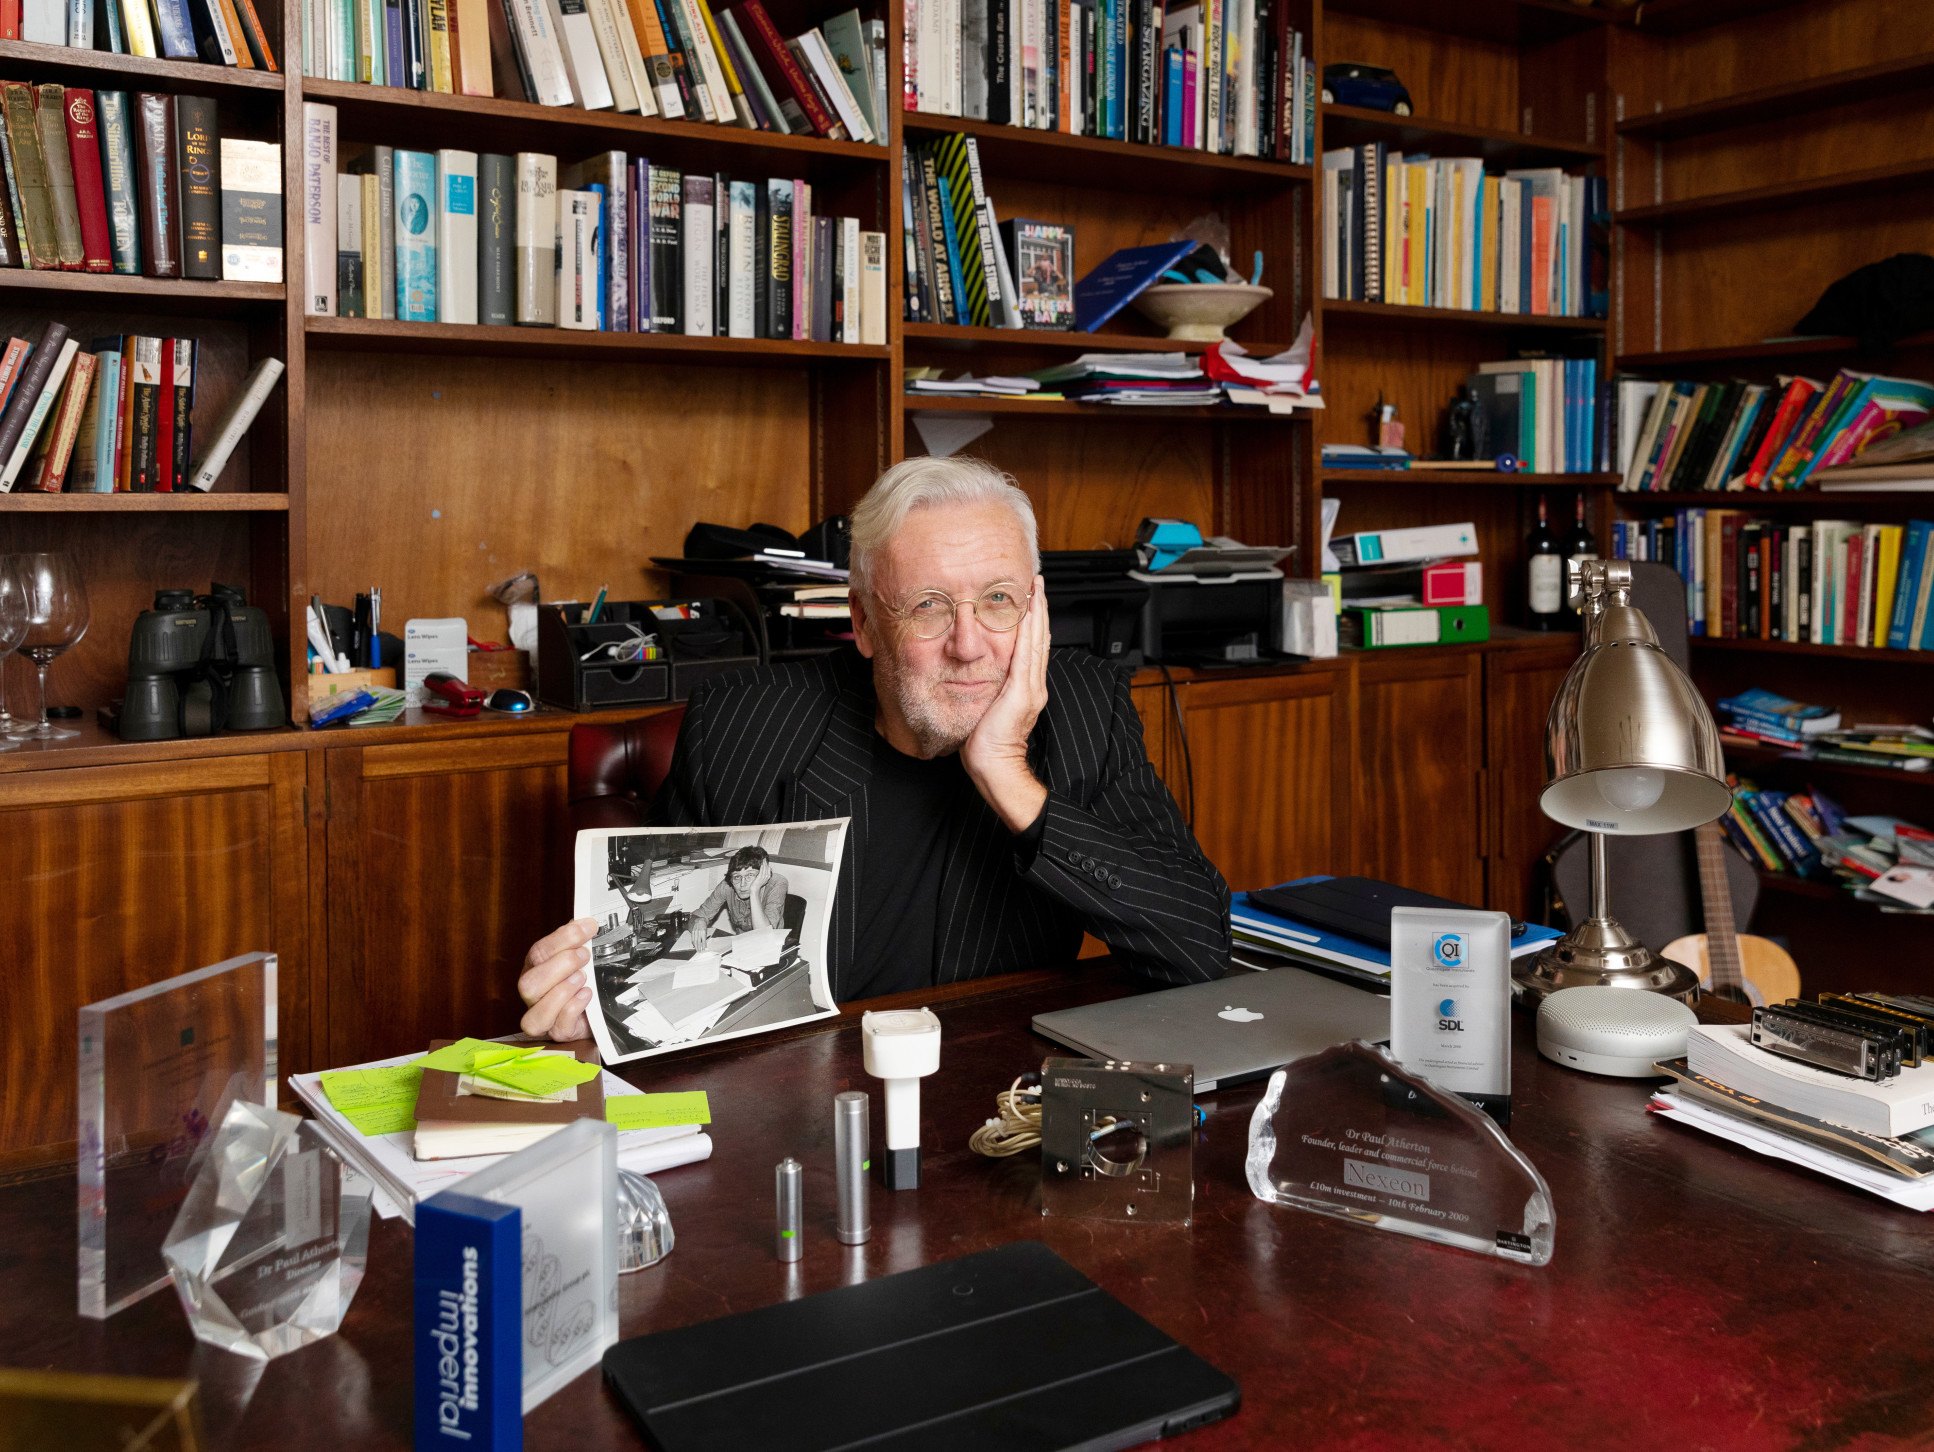 Paul Atherton sitting at a desk surrounded by books